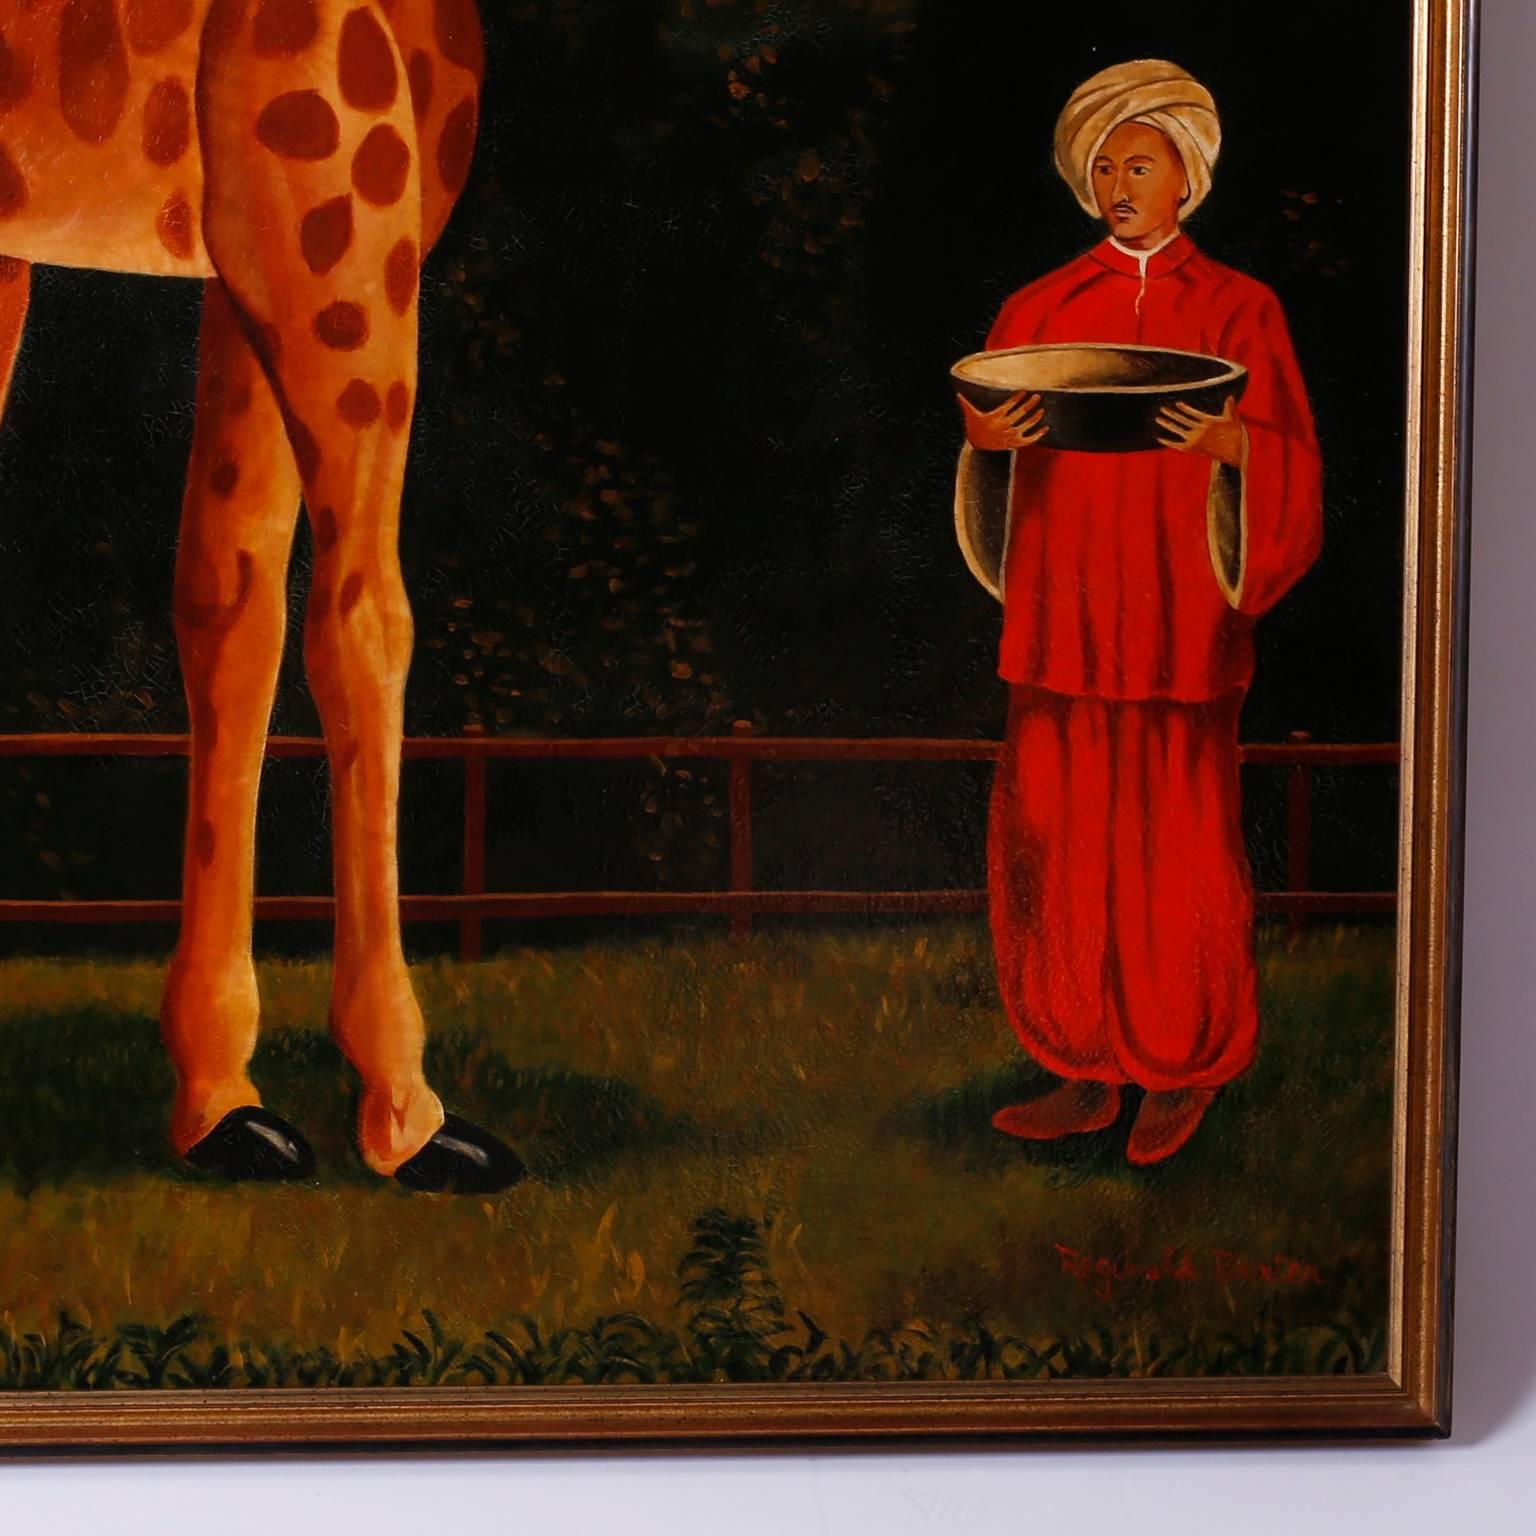 Large and amusing oil painting on canvas of a giraffe and caretaker in an outdoor wooded scene. With a tongue and cheek nod to Victorian parlor paintings, this decorative piece has a contrived orientalist yet folk painting quality with an aged